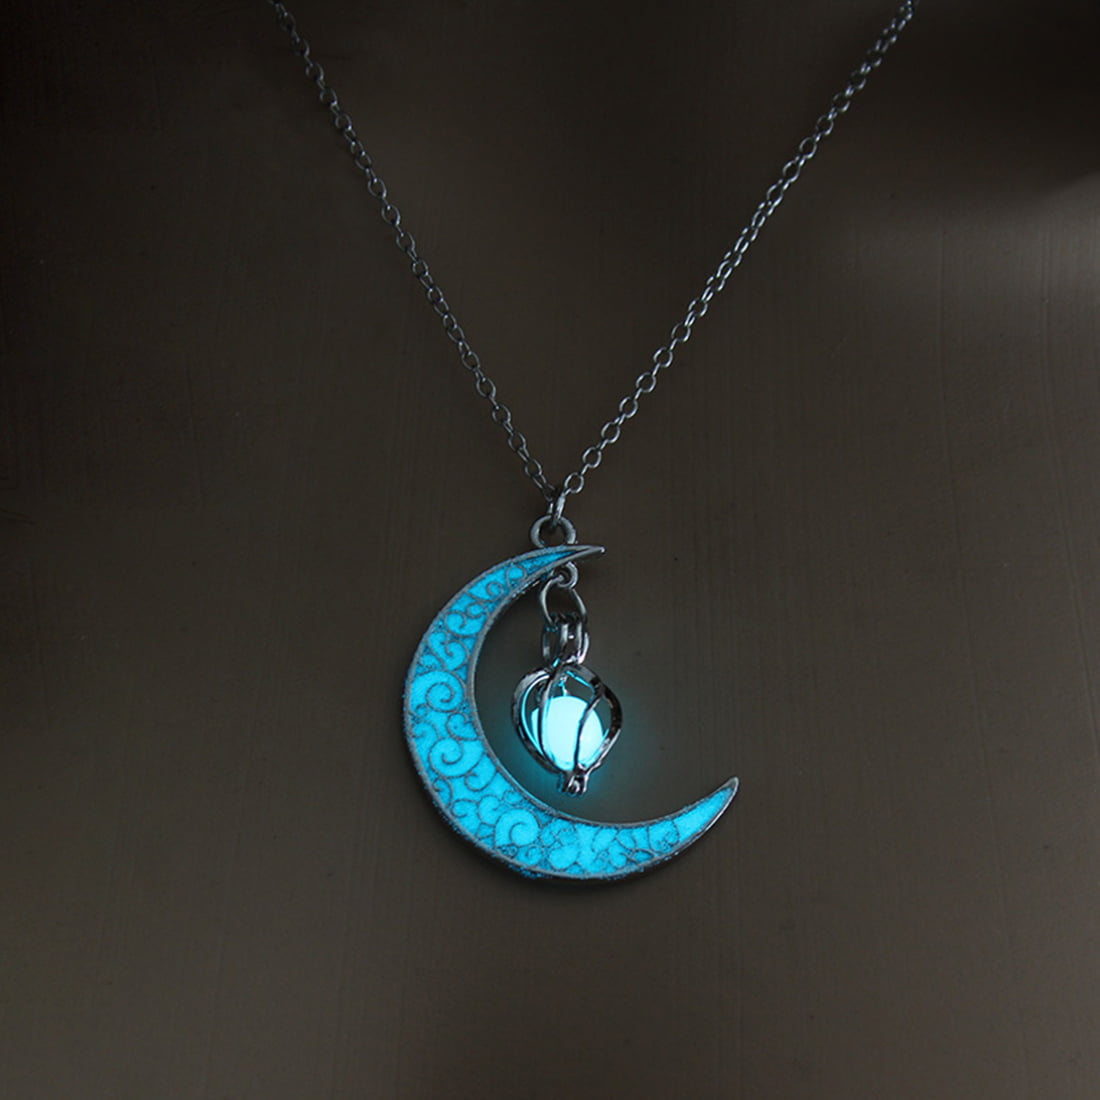 GAJSDJHN Necklaces Jewelry Silver Color Alloy Lotus Flower Luminous Glow in The Dark Crescent Pendant Necklace for Women Jewelry 